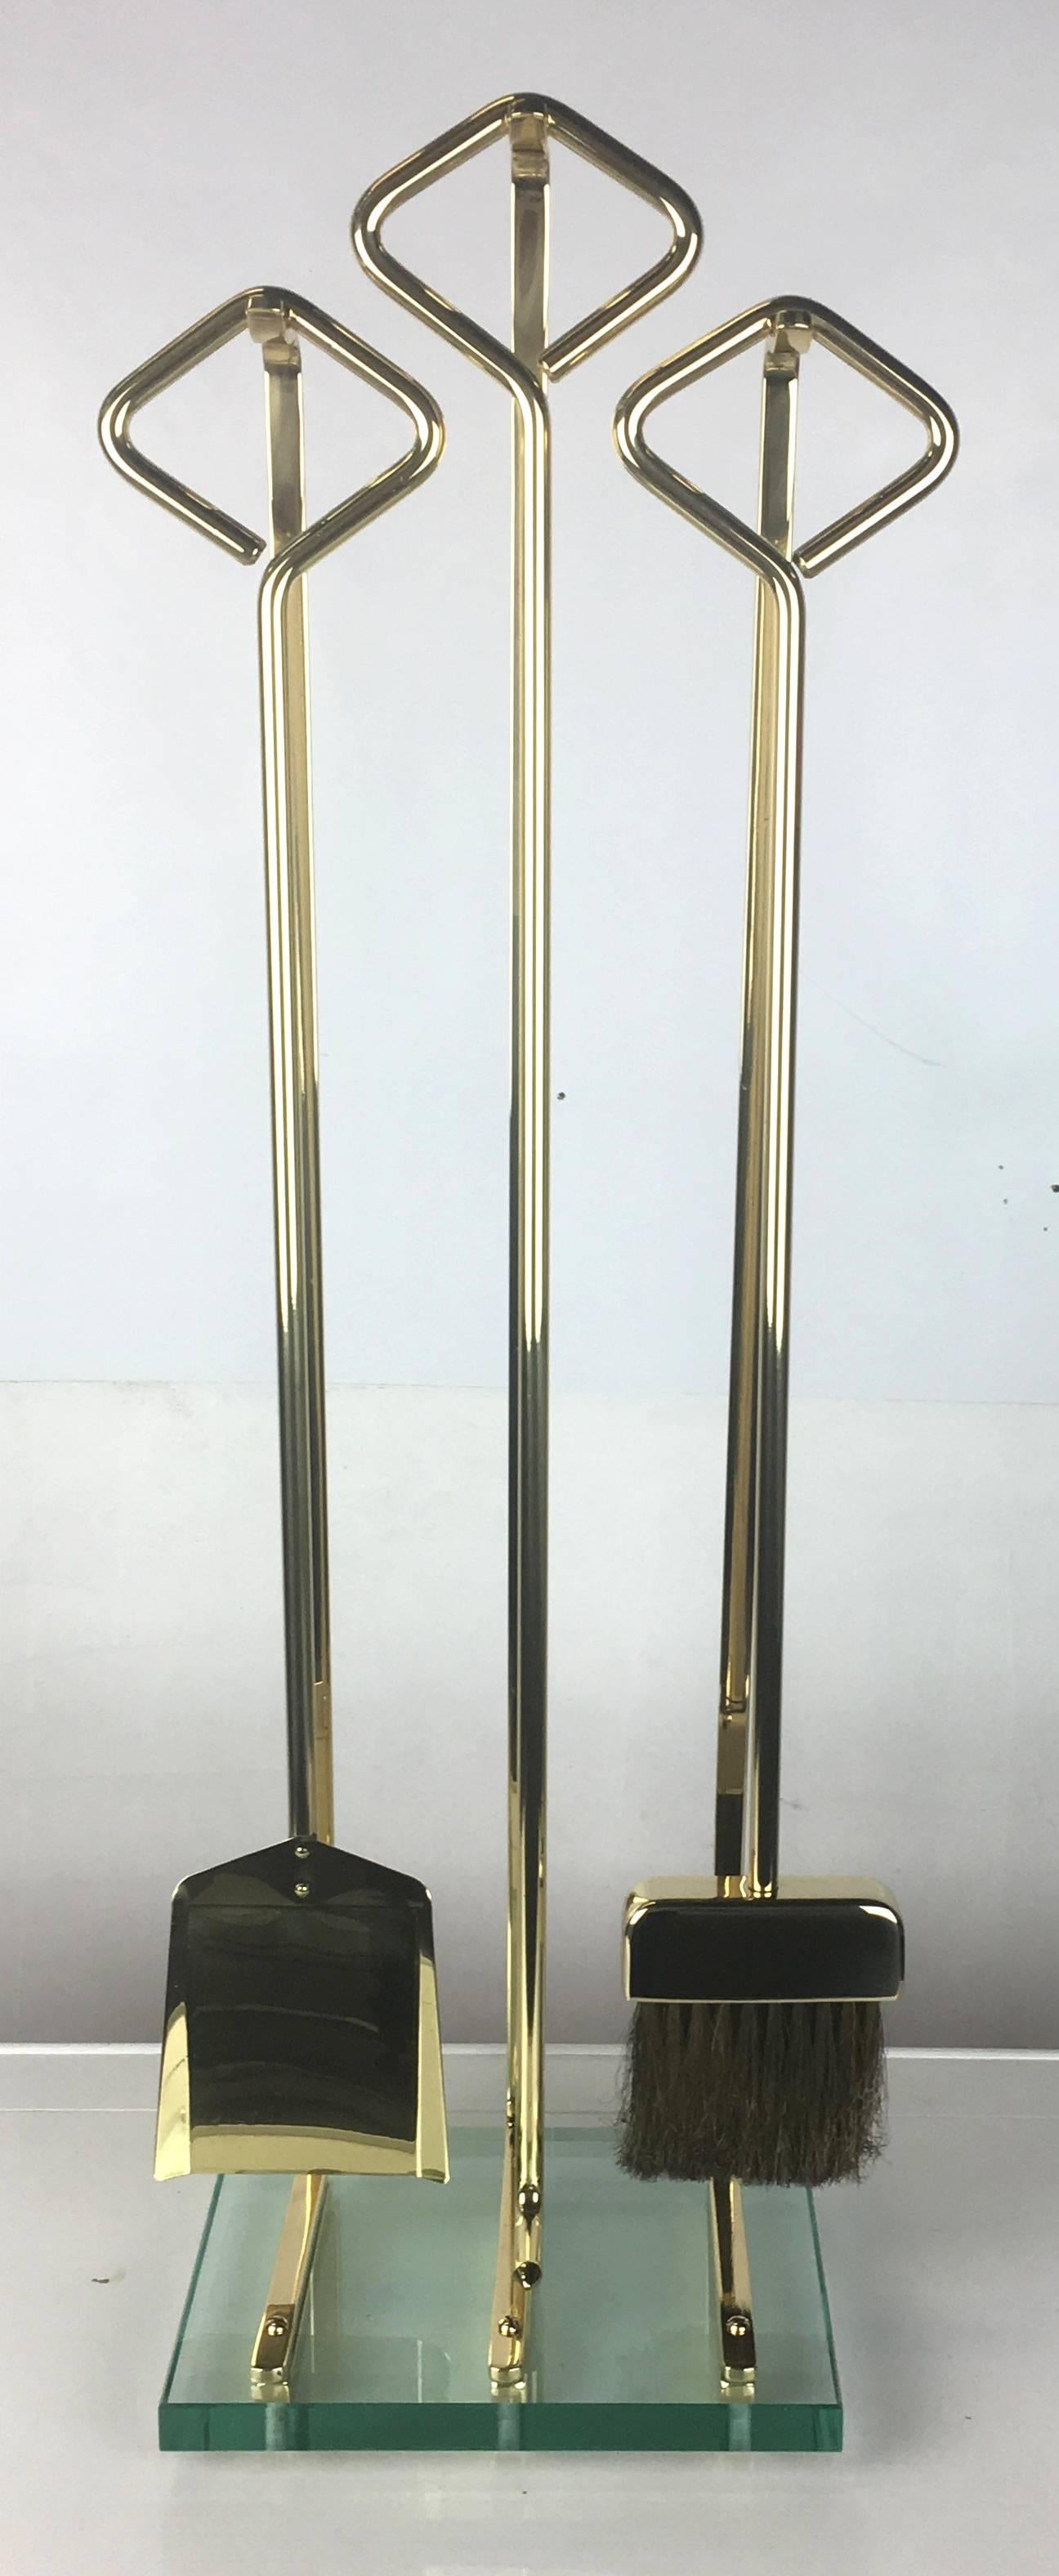 Finely crafted solid brass set of fireplace tools in the style of Fontana Arte. The set has been painstakingly restored; professionally polished, lacquered, and presented in as-new condition. The set consists of a thick glass base sitting three